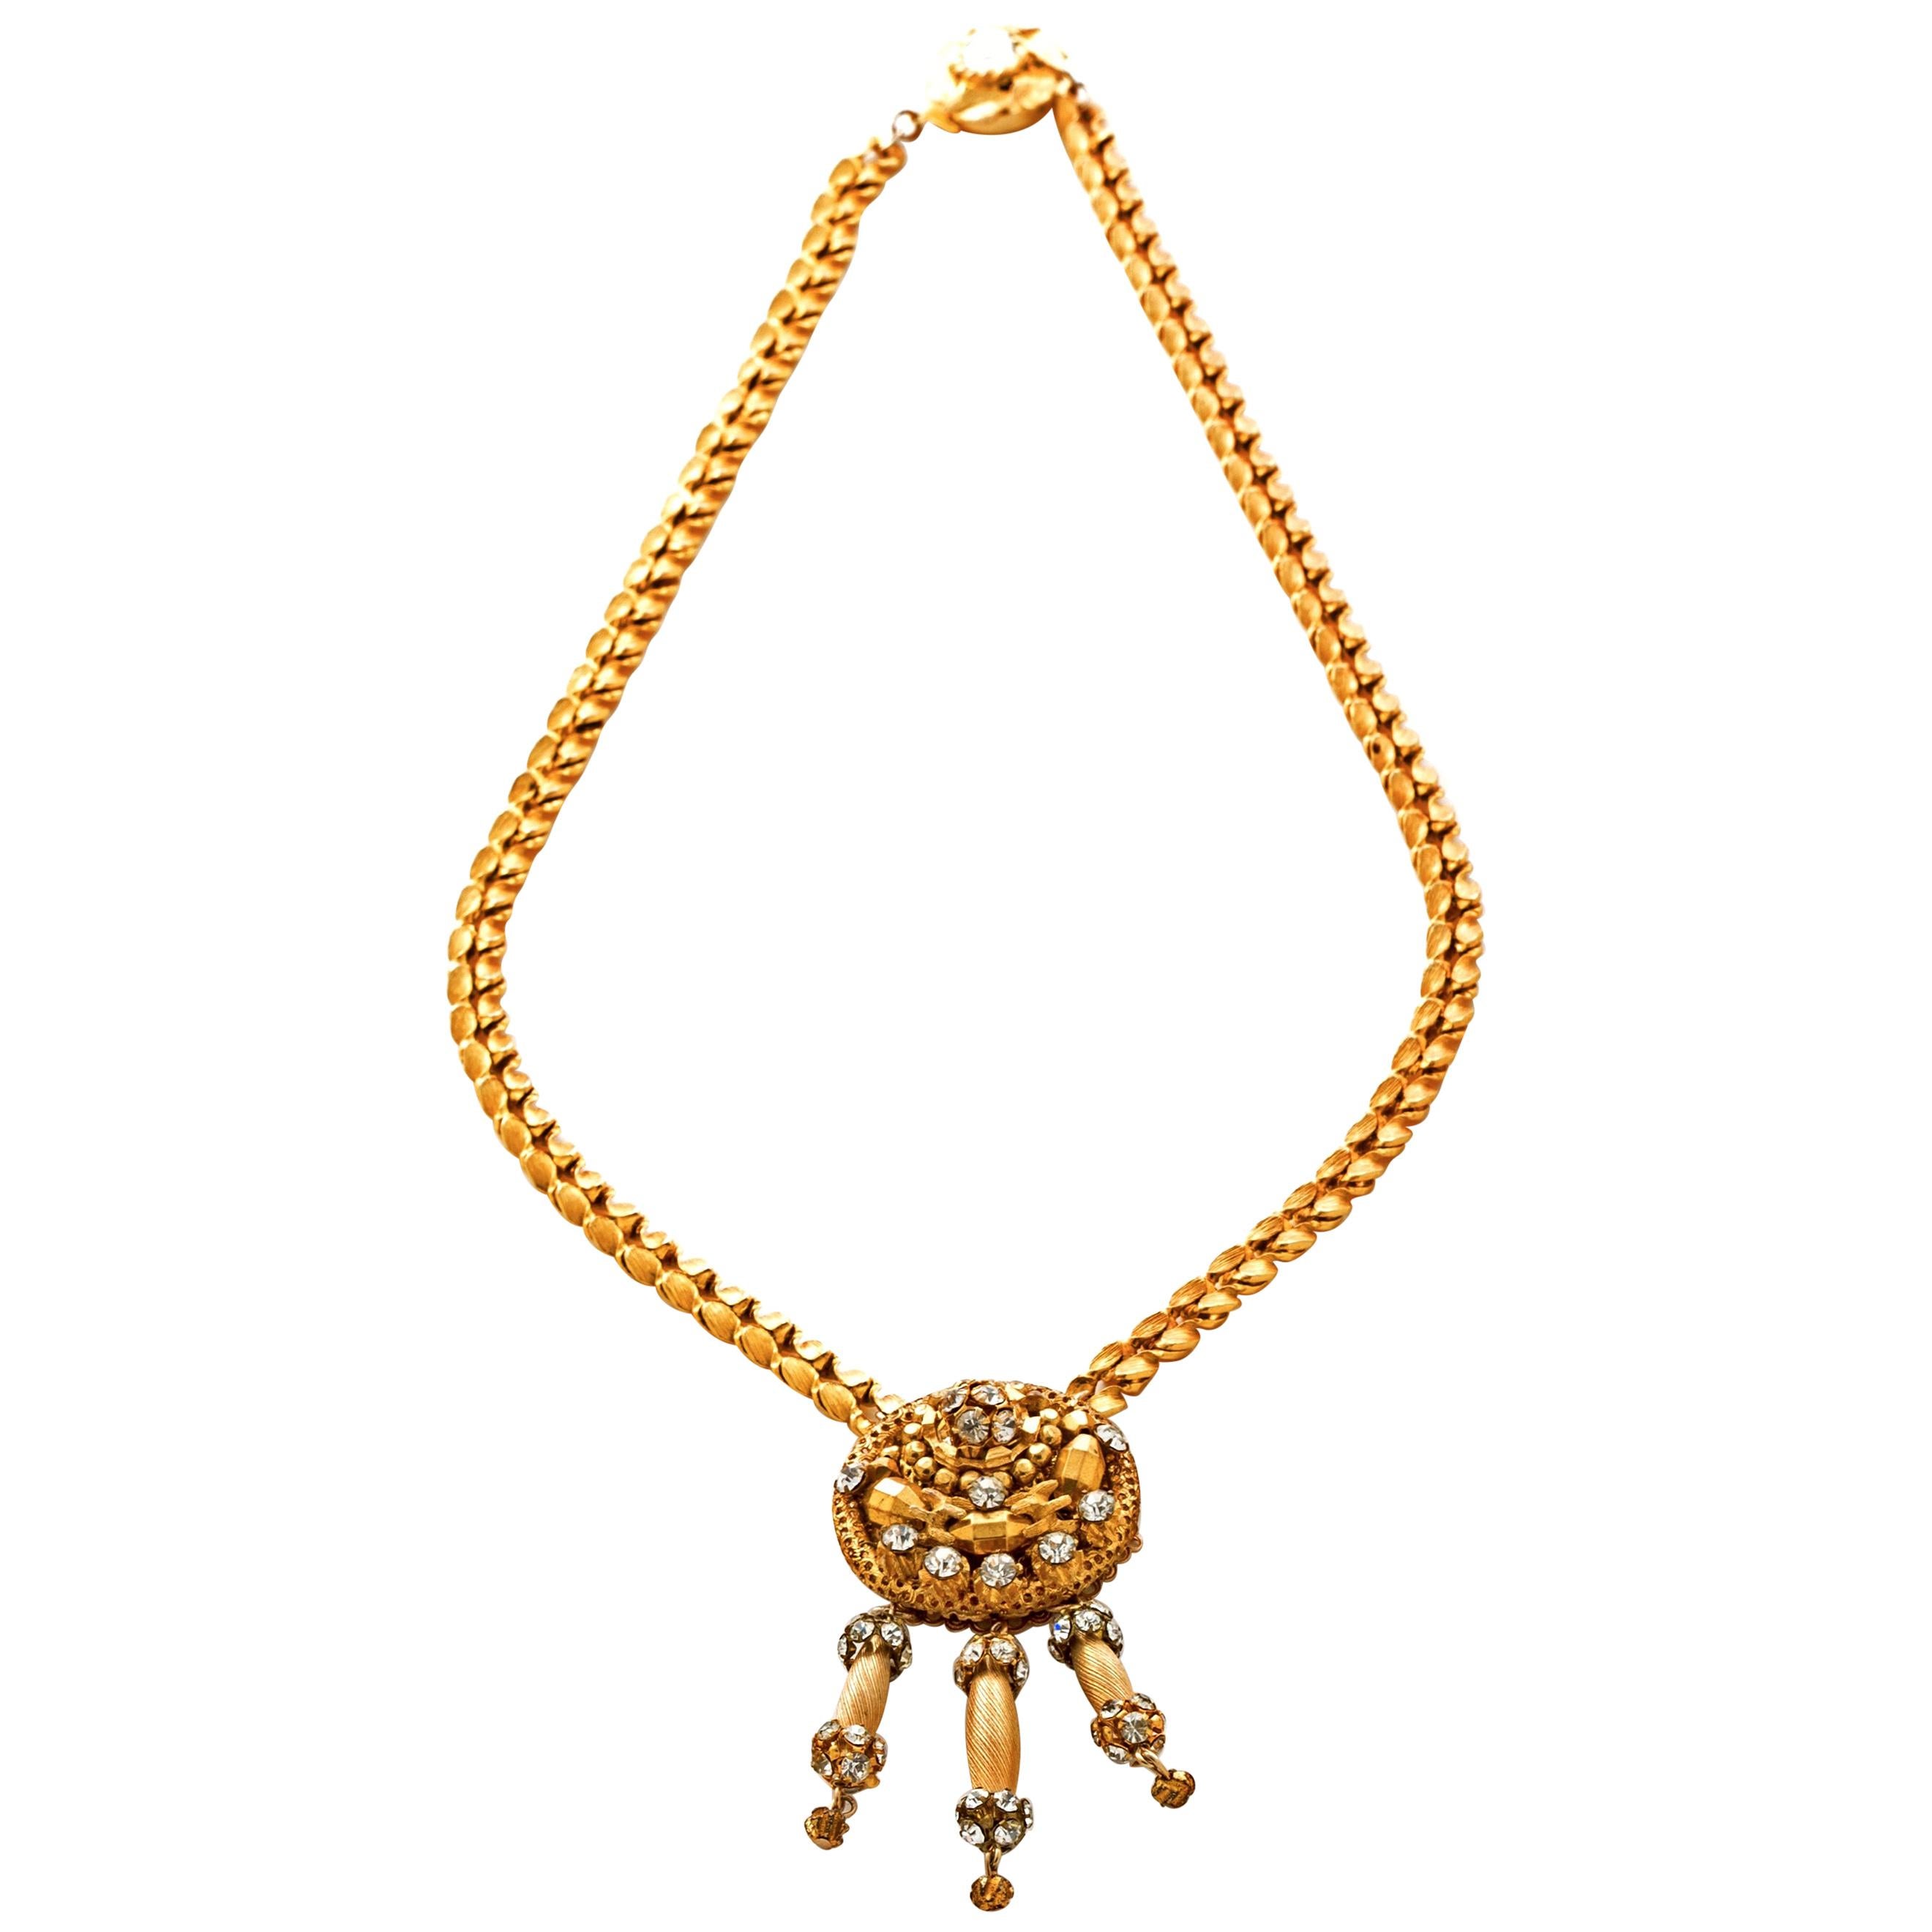 Hattie Carnegie Necklace & Earrings in Gilt Metal with Crystals